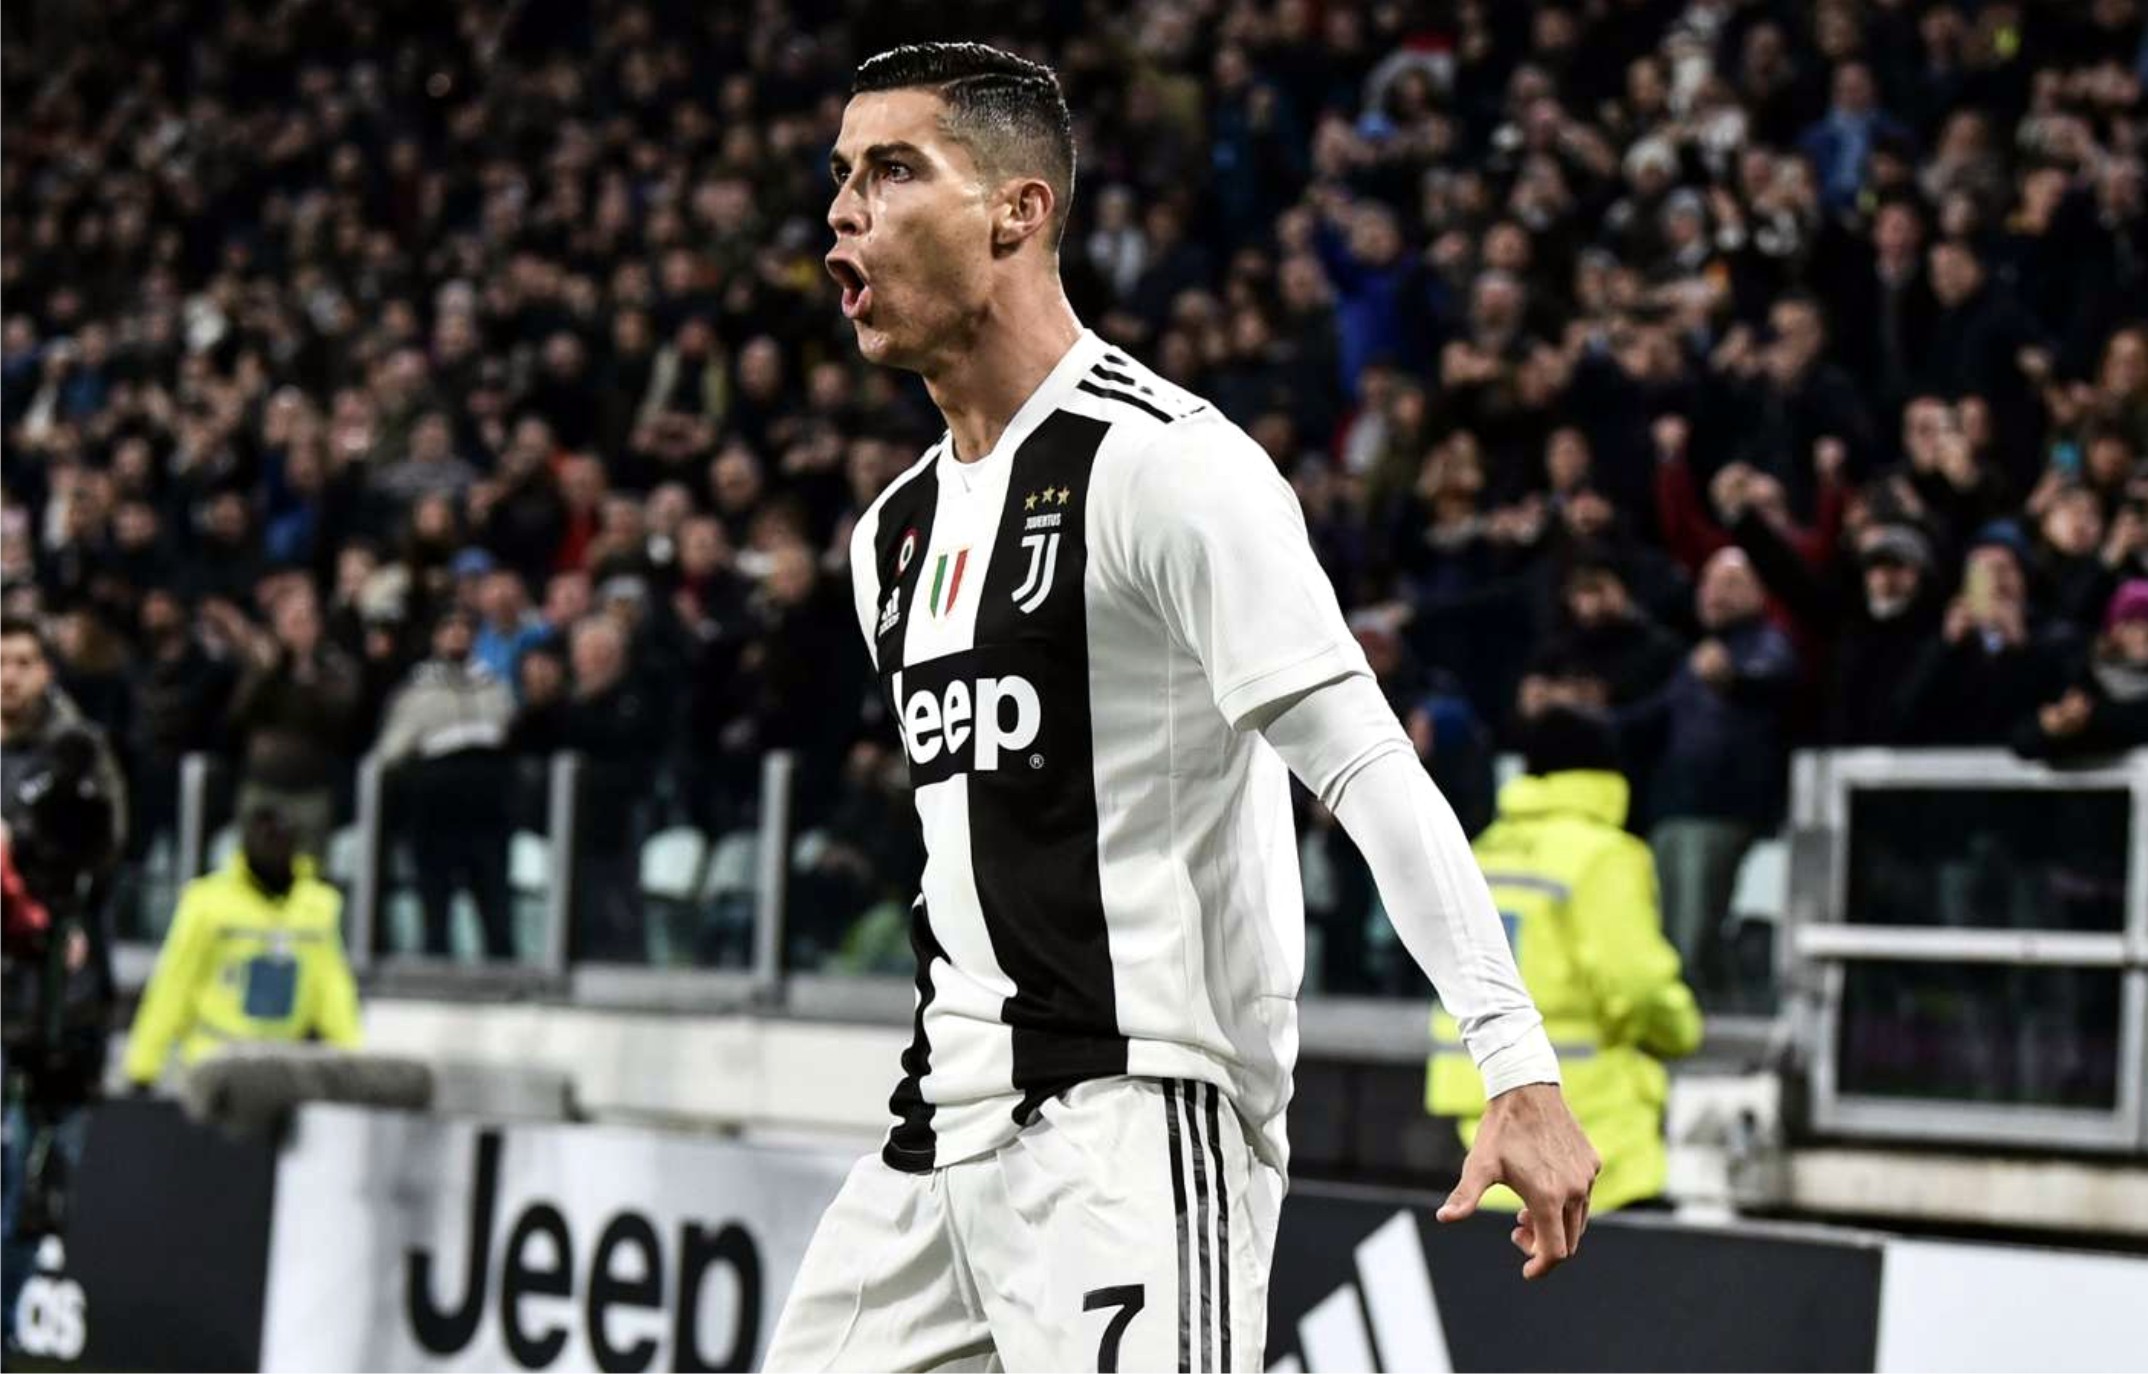 Ronaldo stands out in football' - Barcelona star Messi salutes